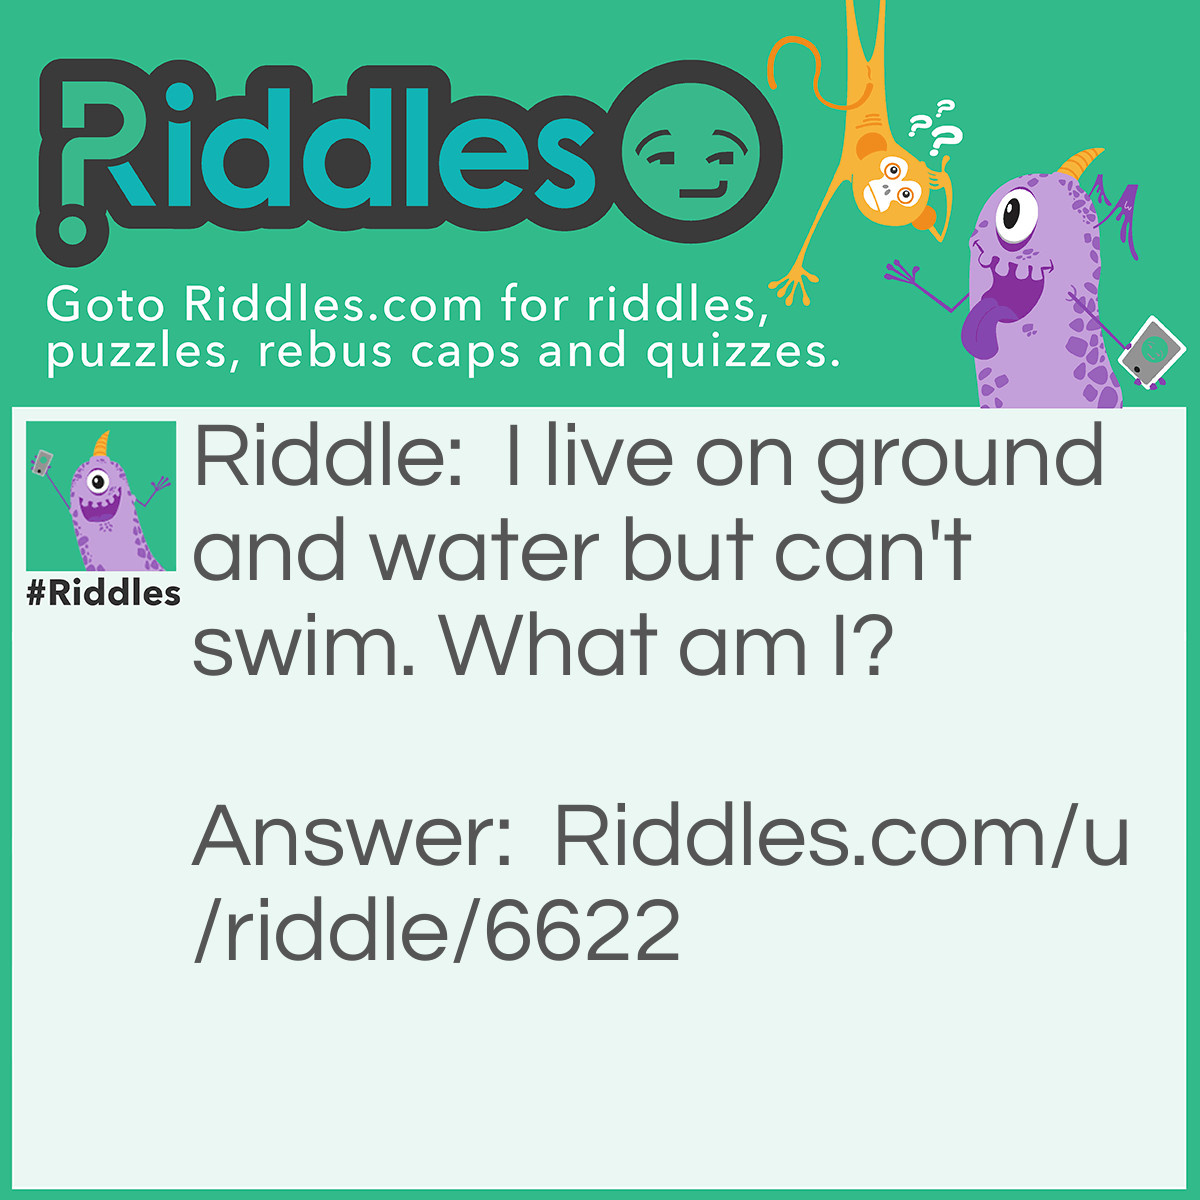 Riddle: I live on ground and water but can't swim. What am I? Answer: A worm.